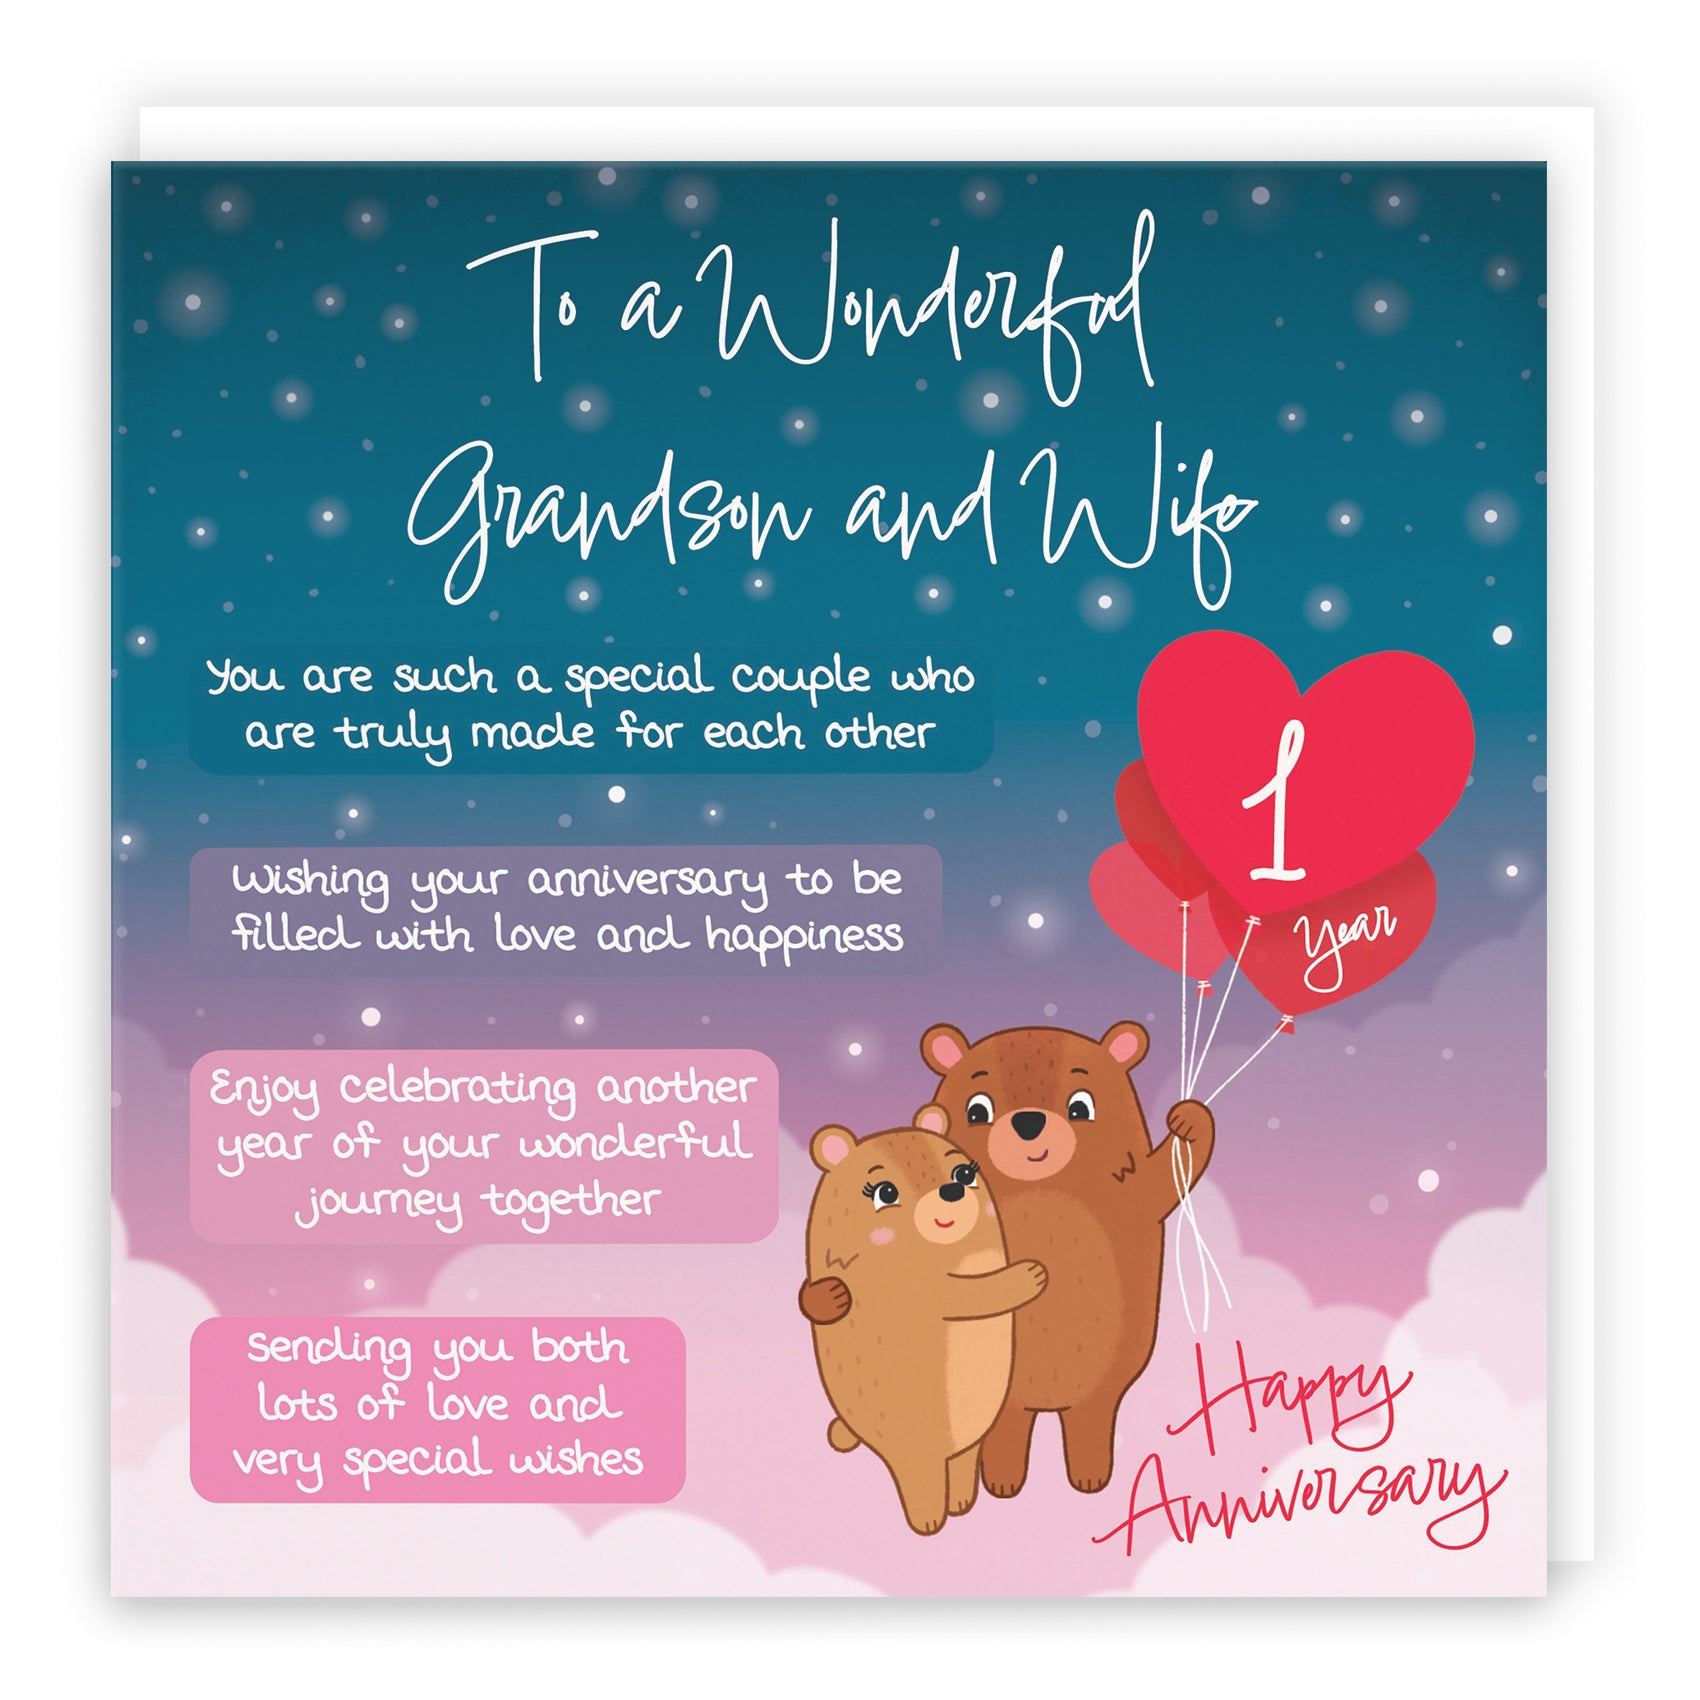 Grandson And Wife 1st Anniversary Card Starry Night Cute Bears